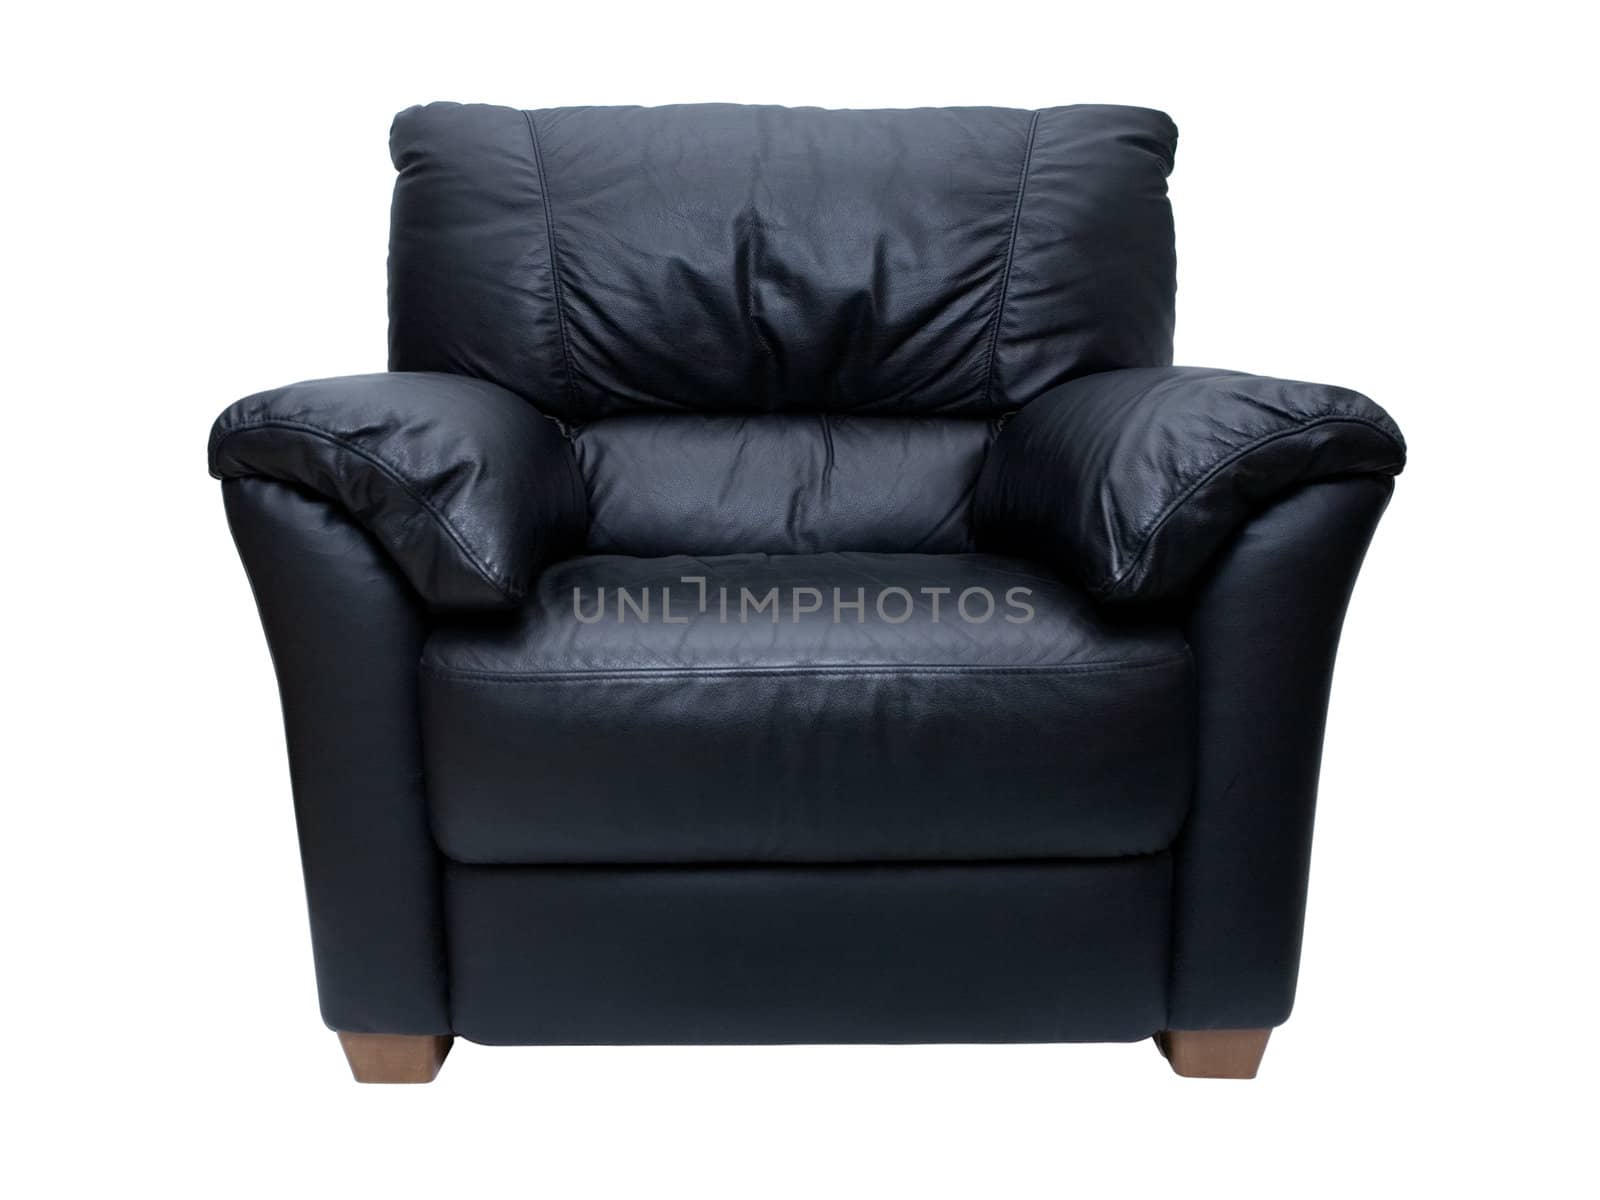 Black leather chair�on a white background